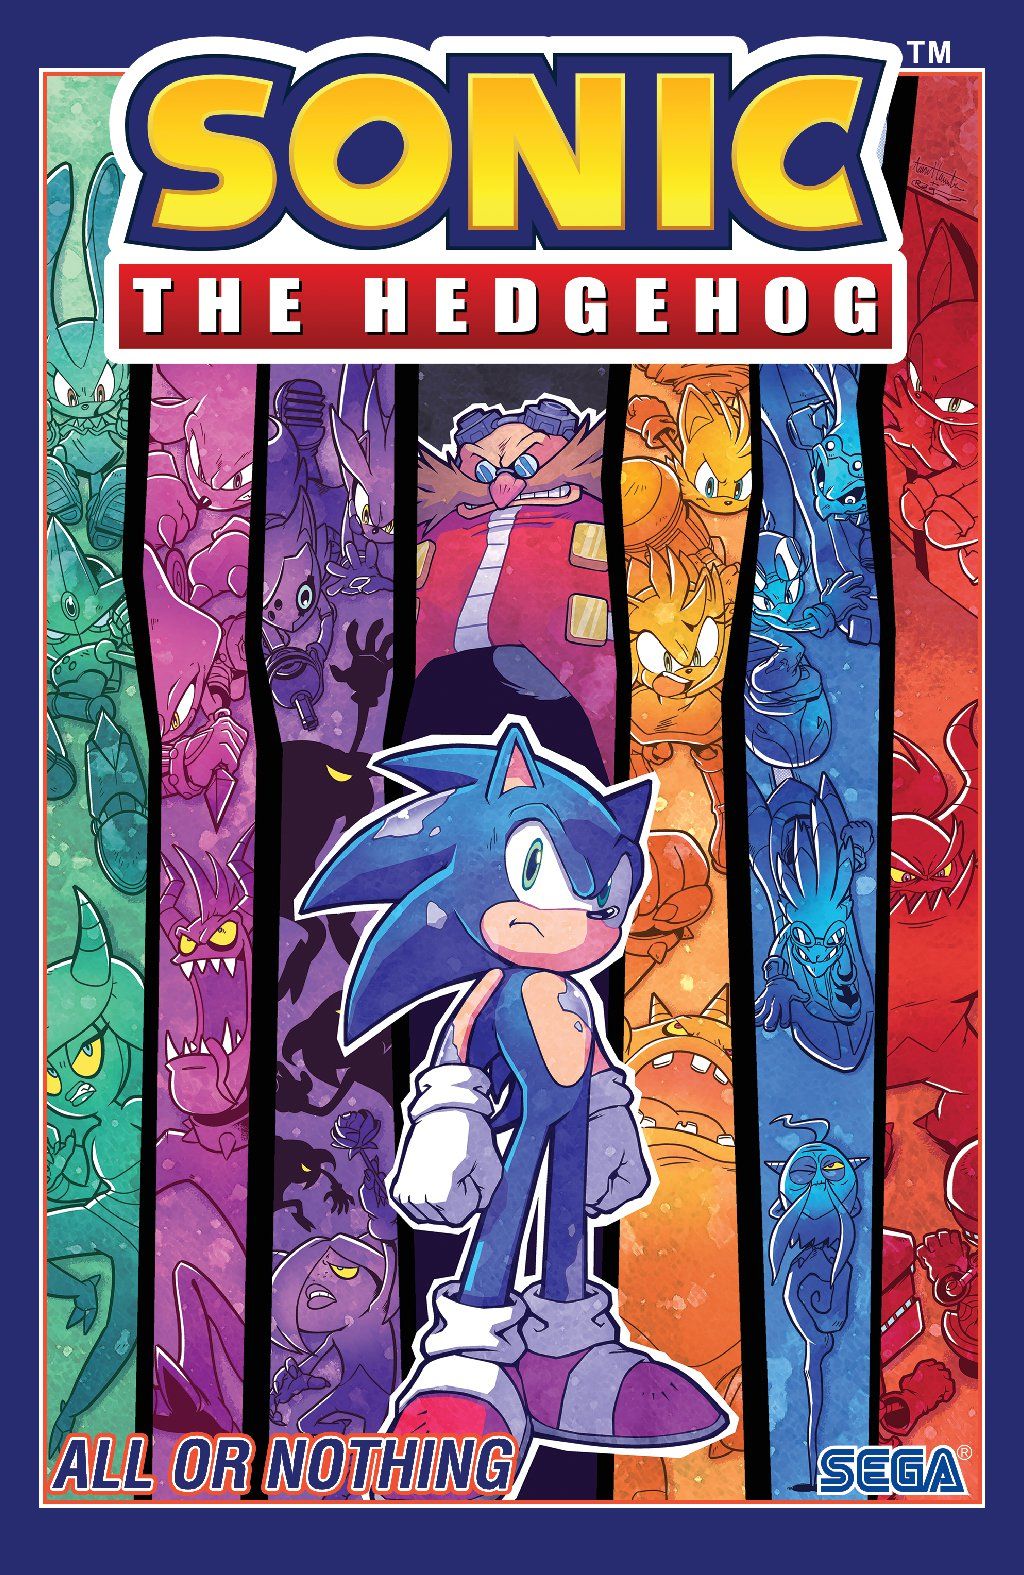 Sonic the Hedgehog Volume 7: All or Nothing